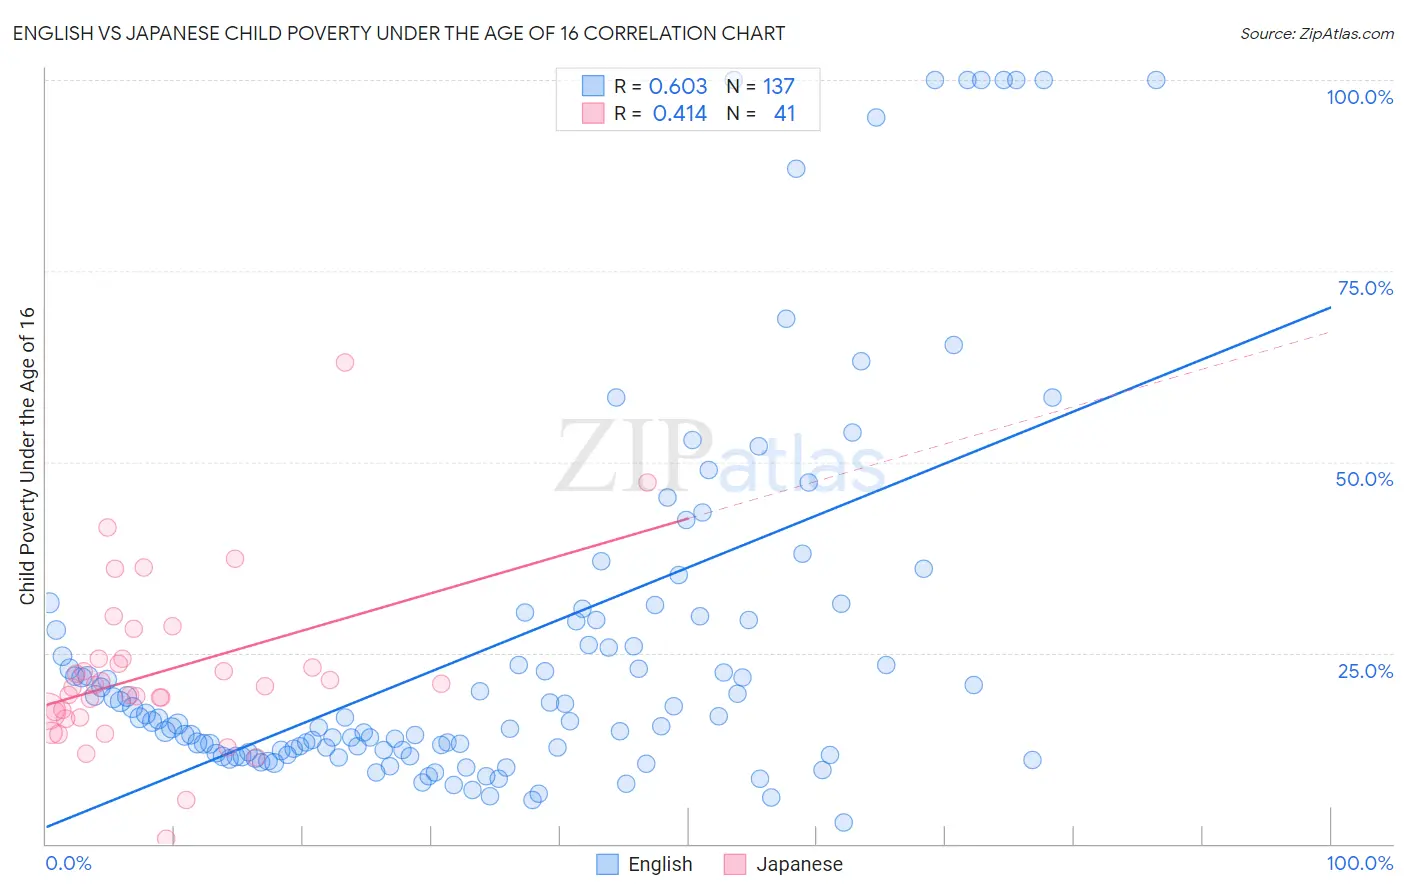 English vs Japanese Child Poverty Under the Age of 16